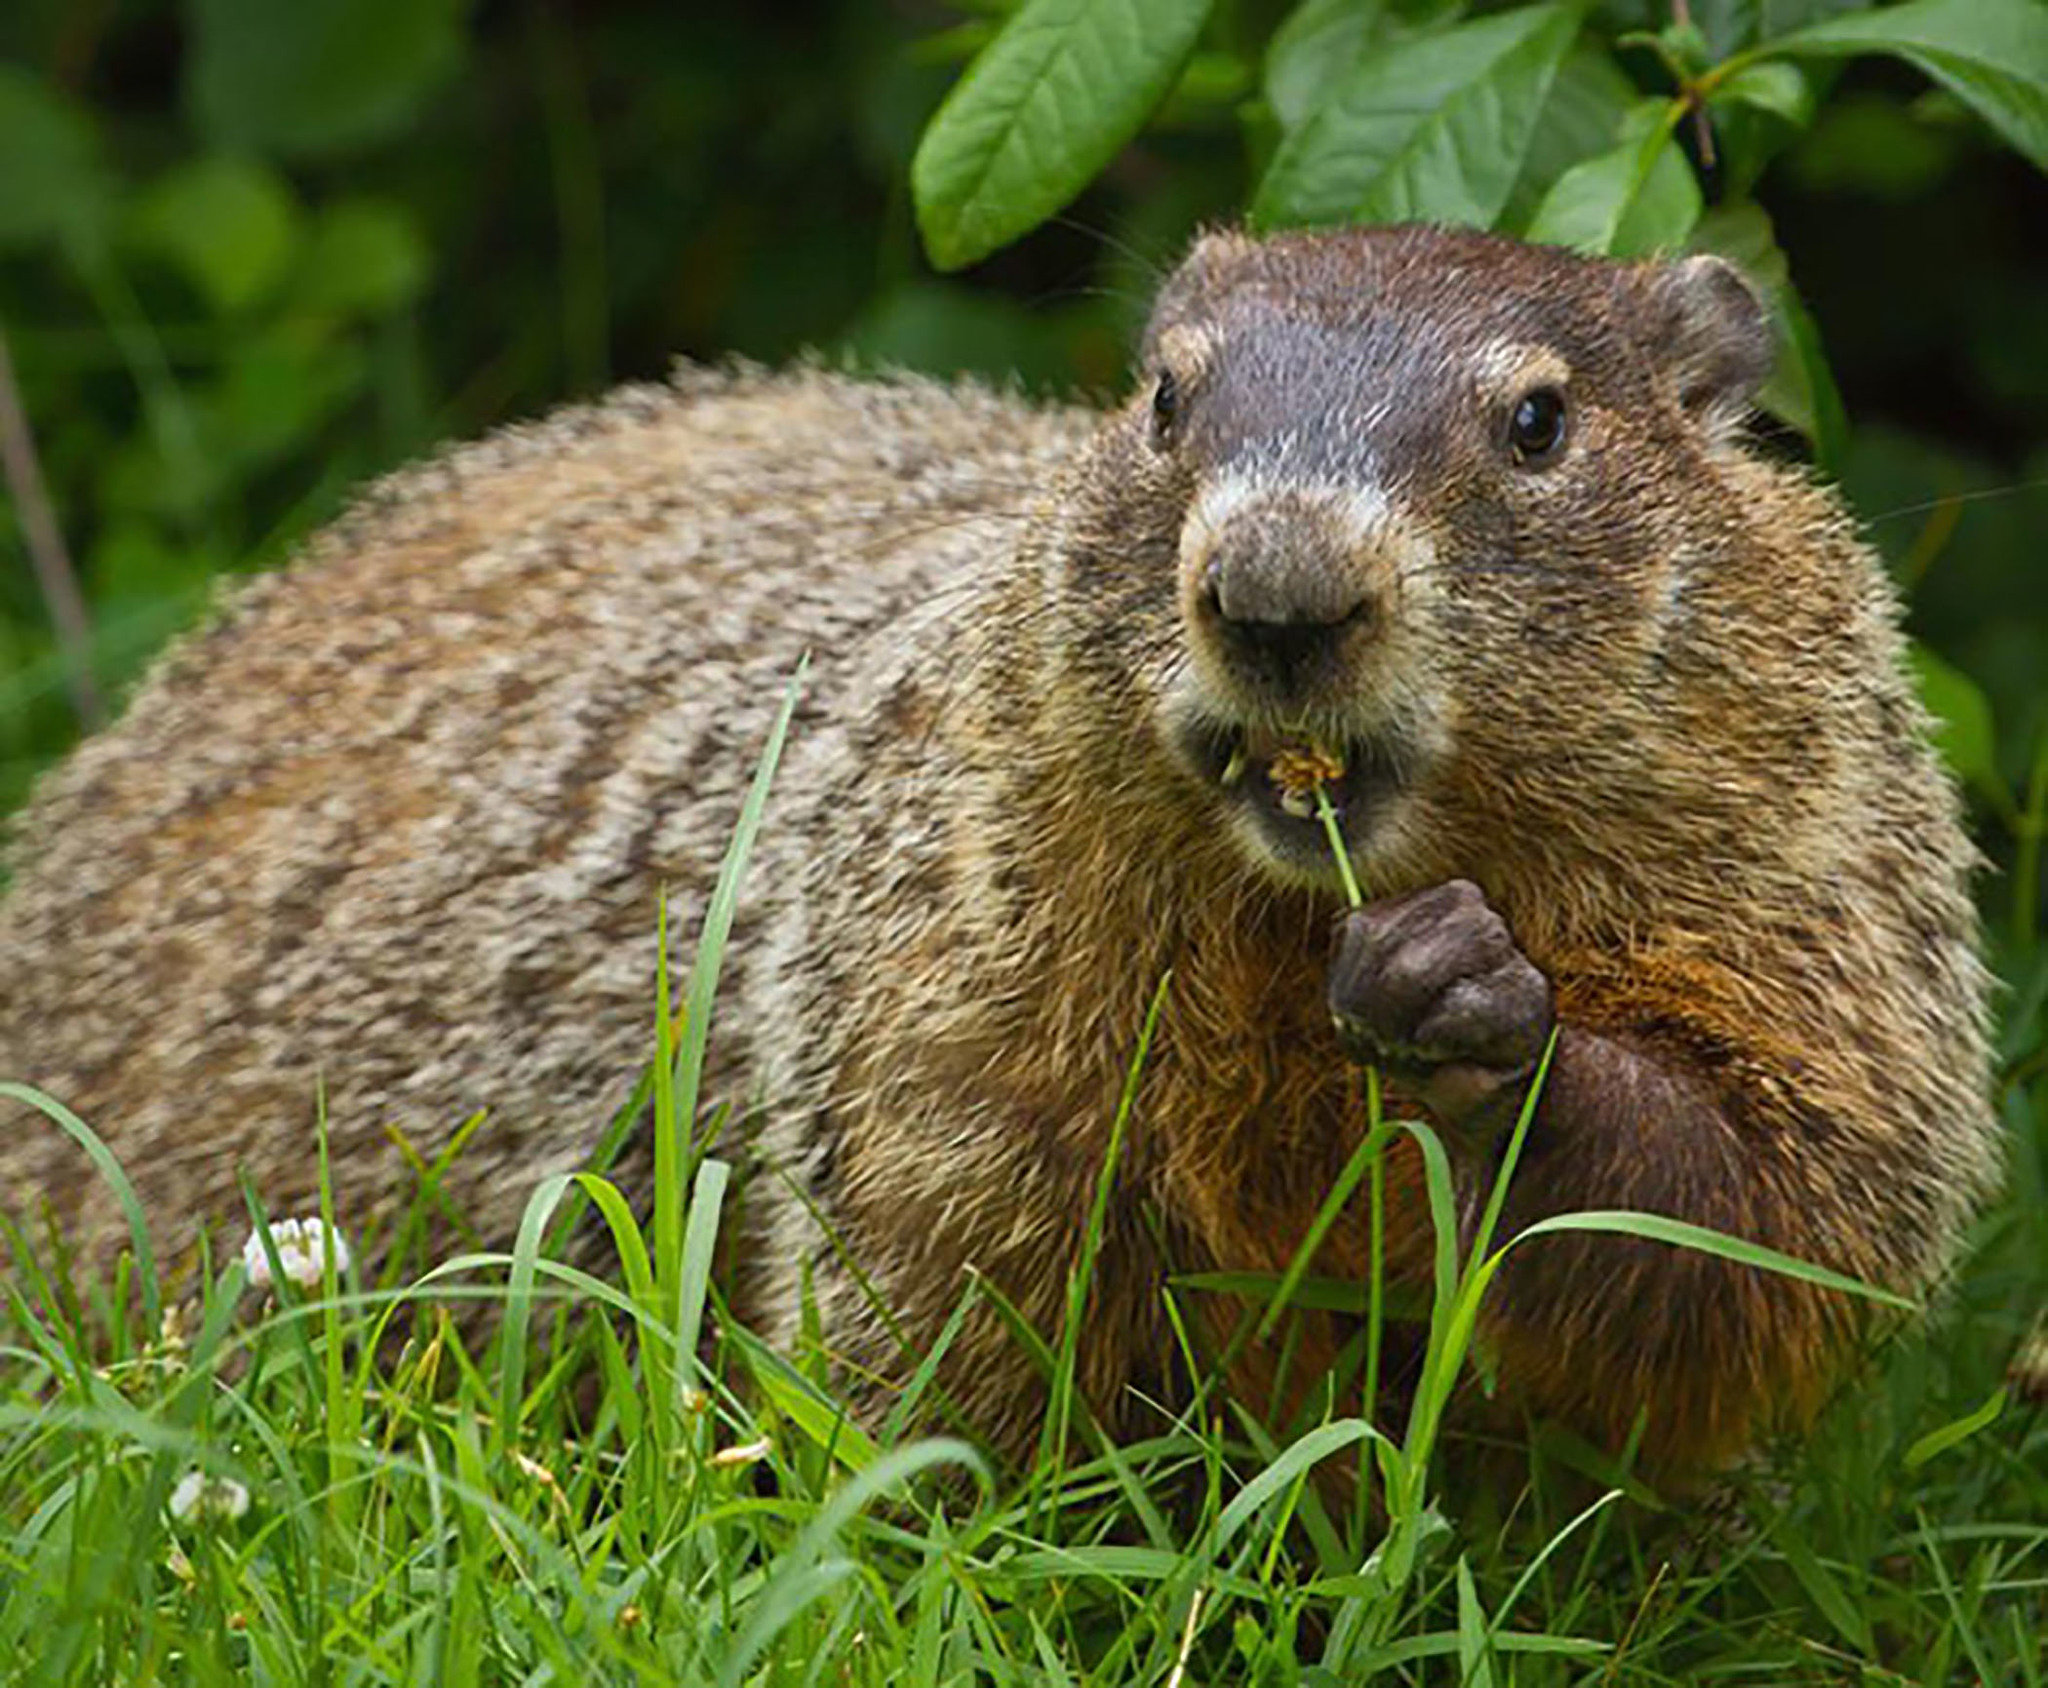 15 things you don't know about groundhogs in Pennsylvania | PennLive.com